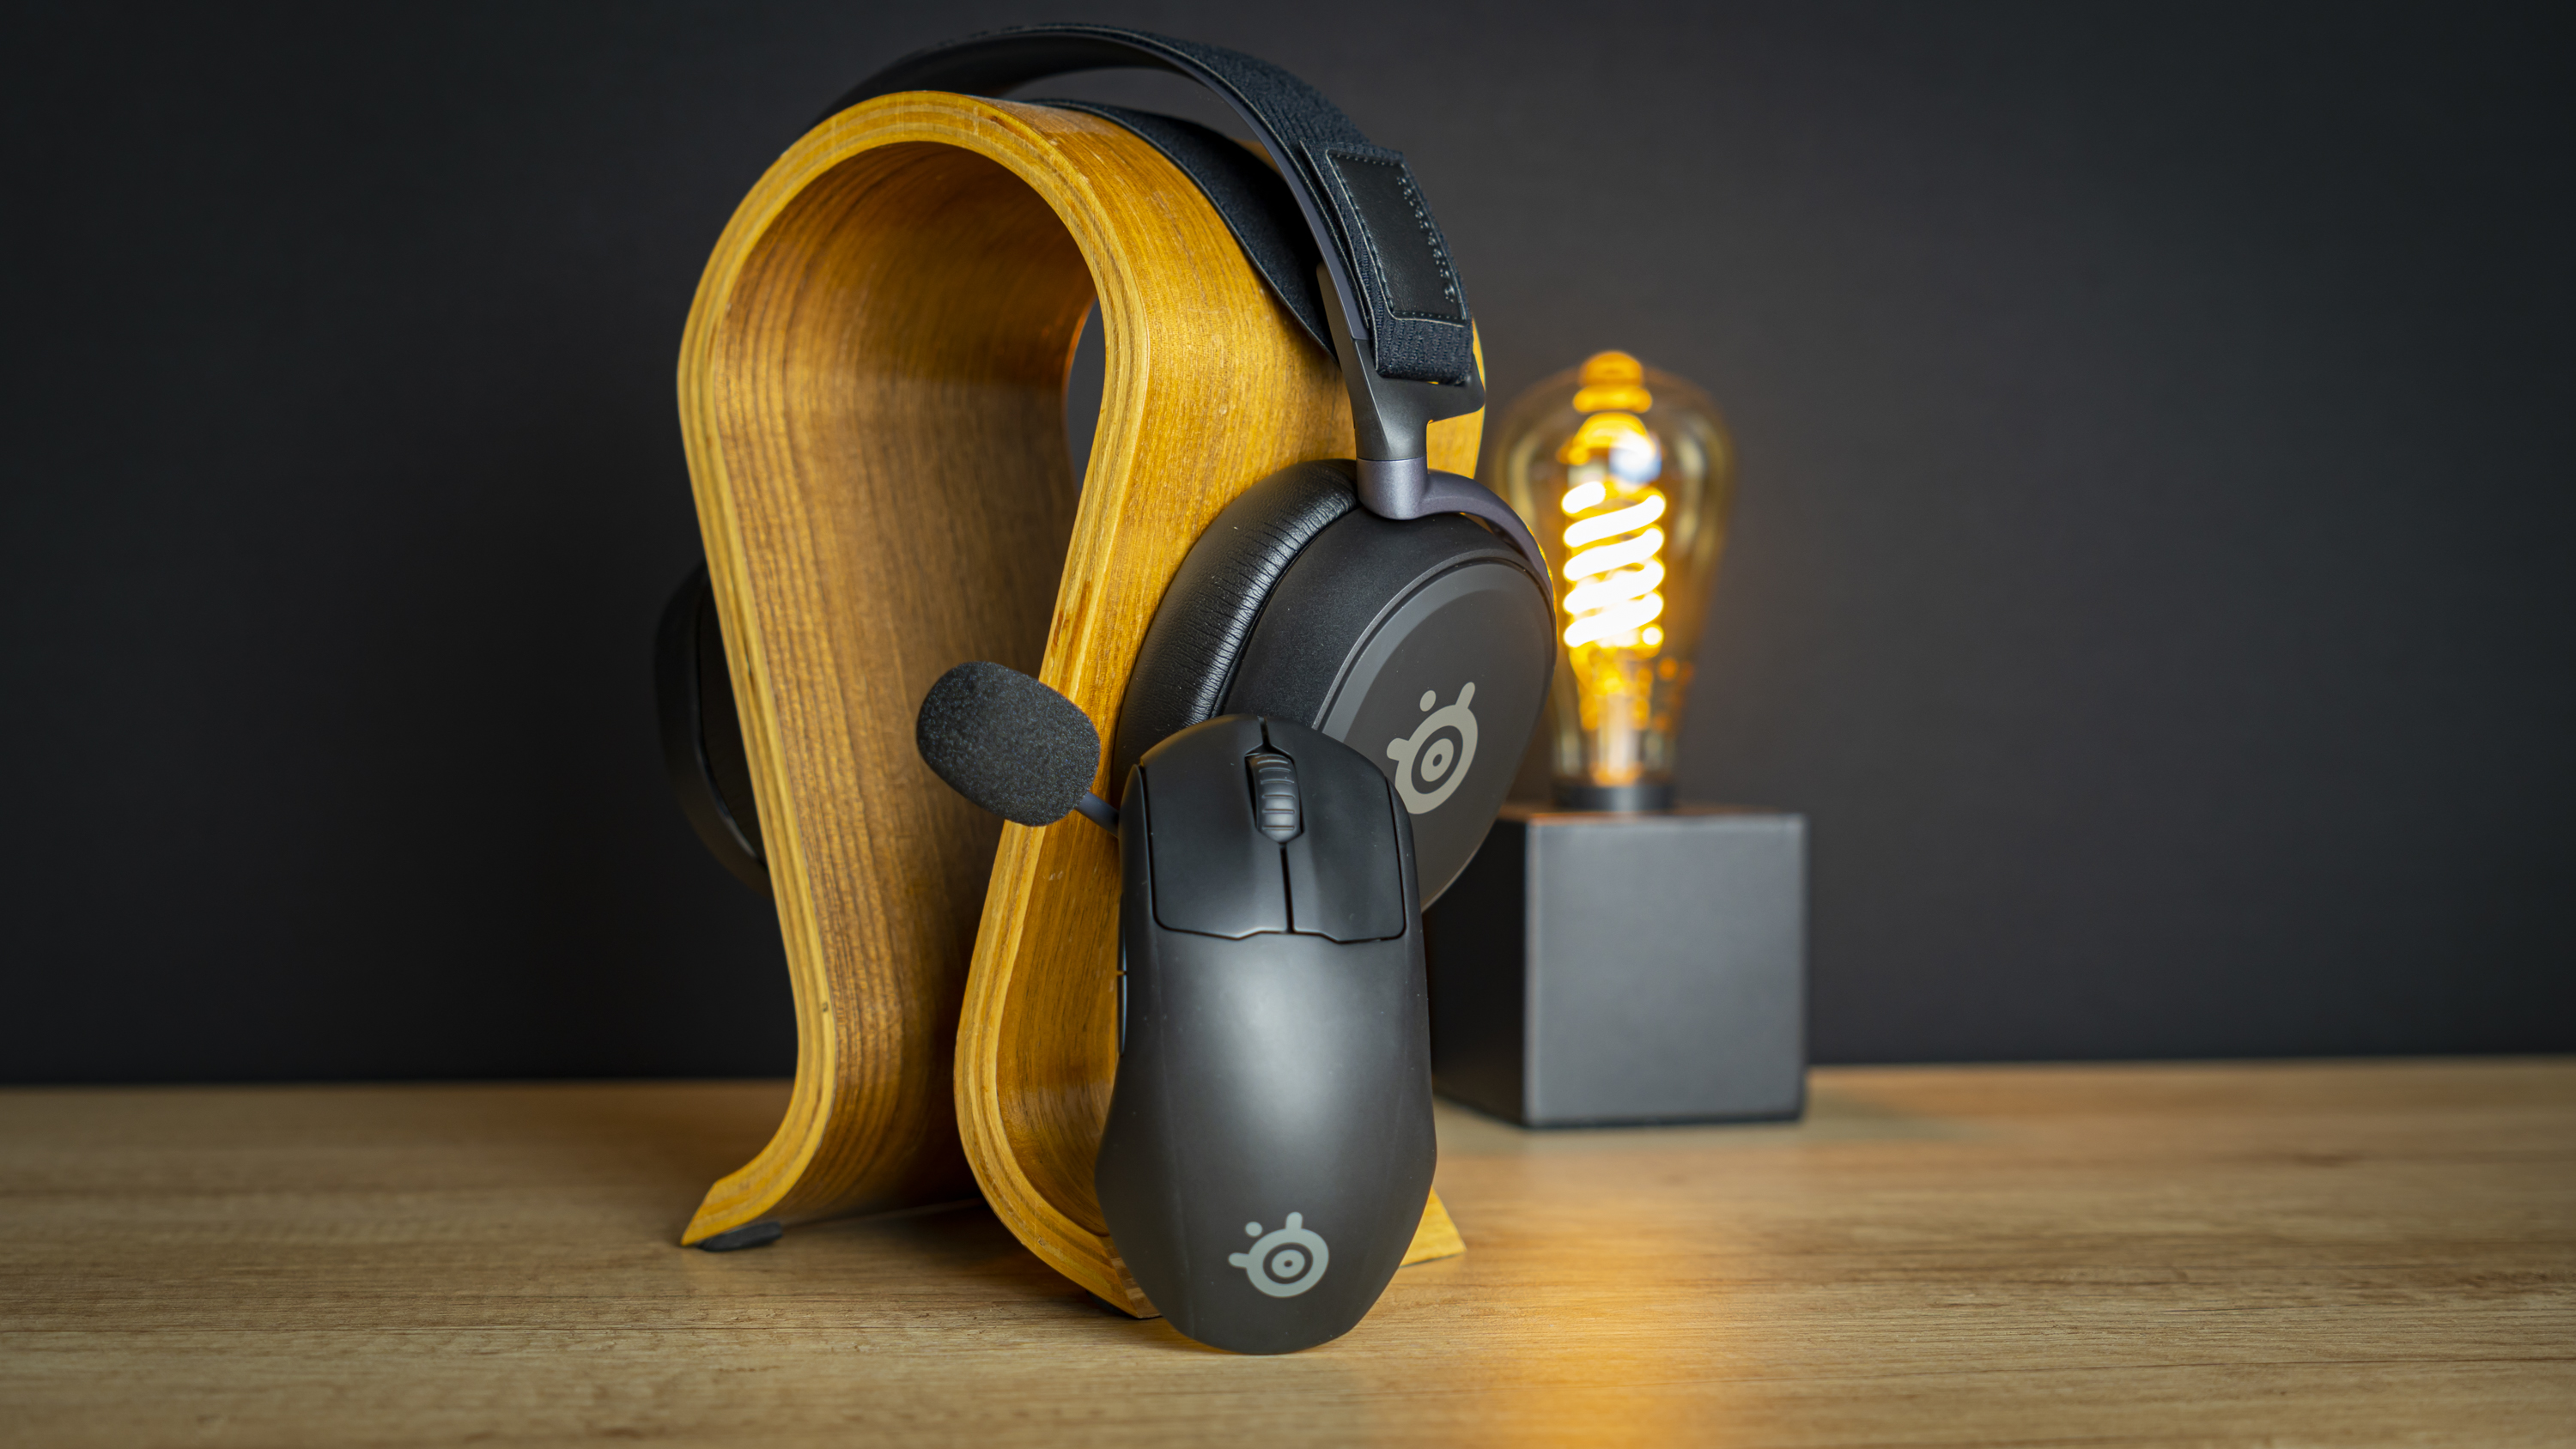 SteelSeries Prime Wireless review: Snappy freedom & accuracy for days